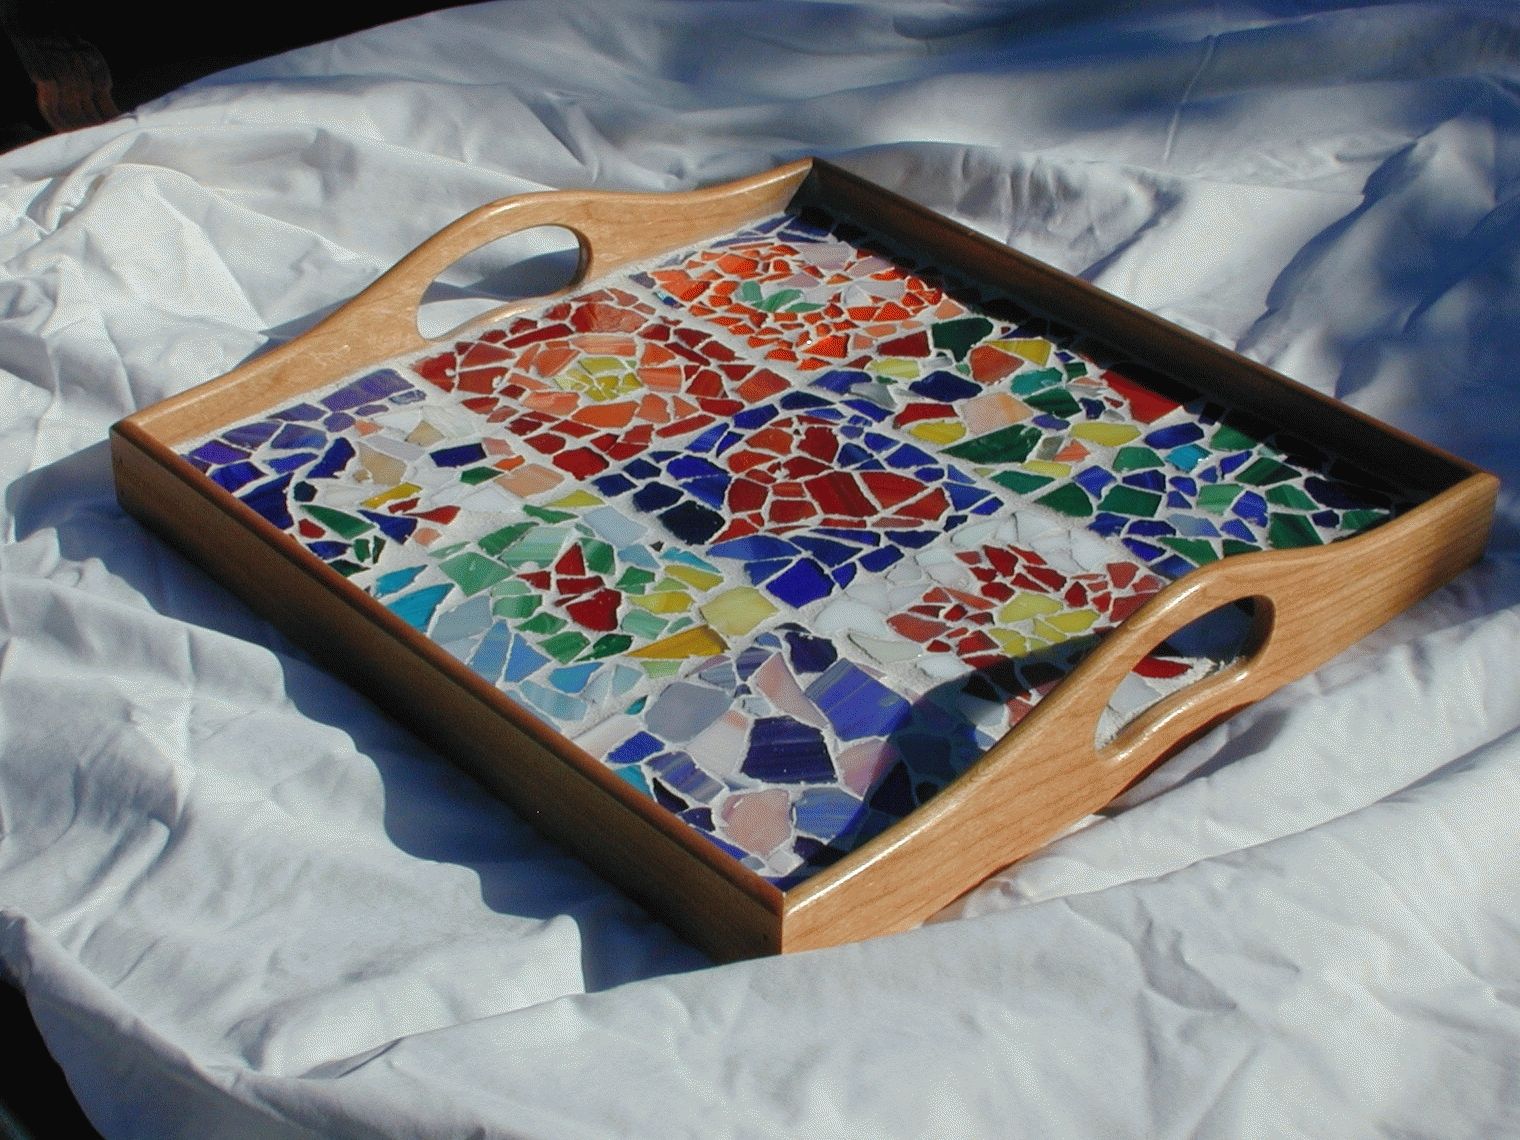 Mosaic Tray Kit For Student Classroom Art Project Intended For Fashionable Mosaic Art Kits For Adults (View 1 of 15)